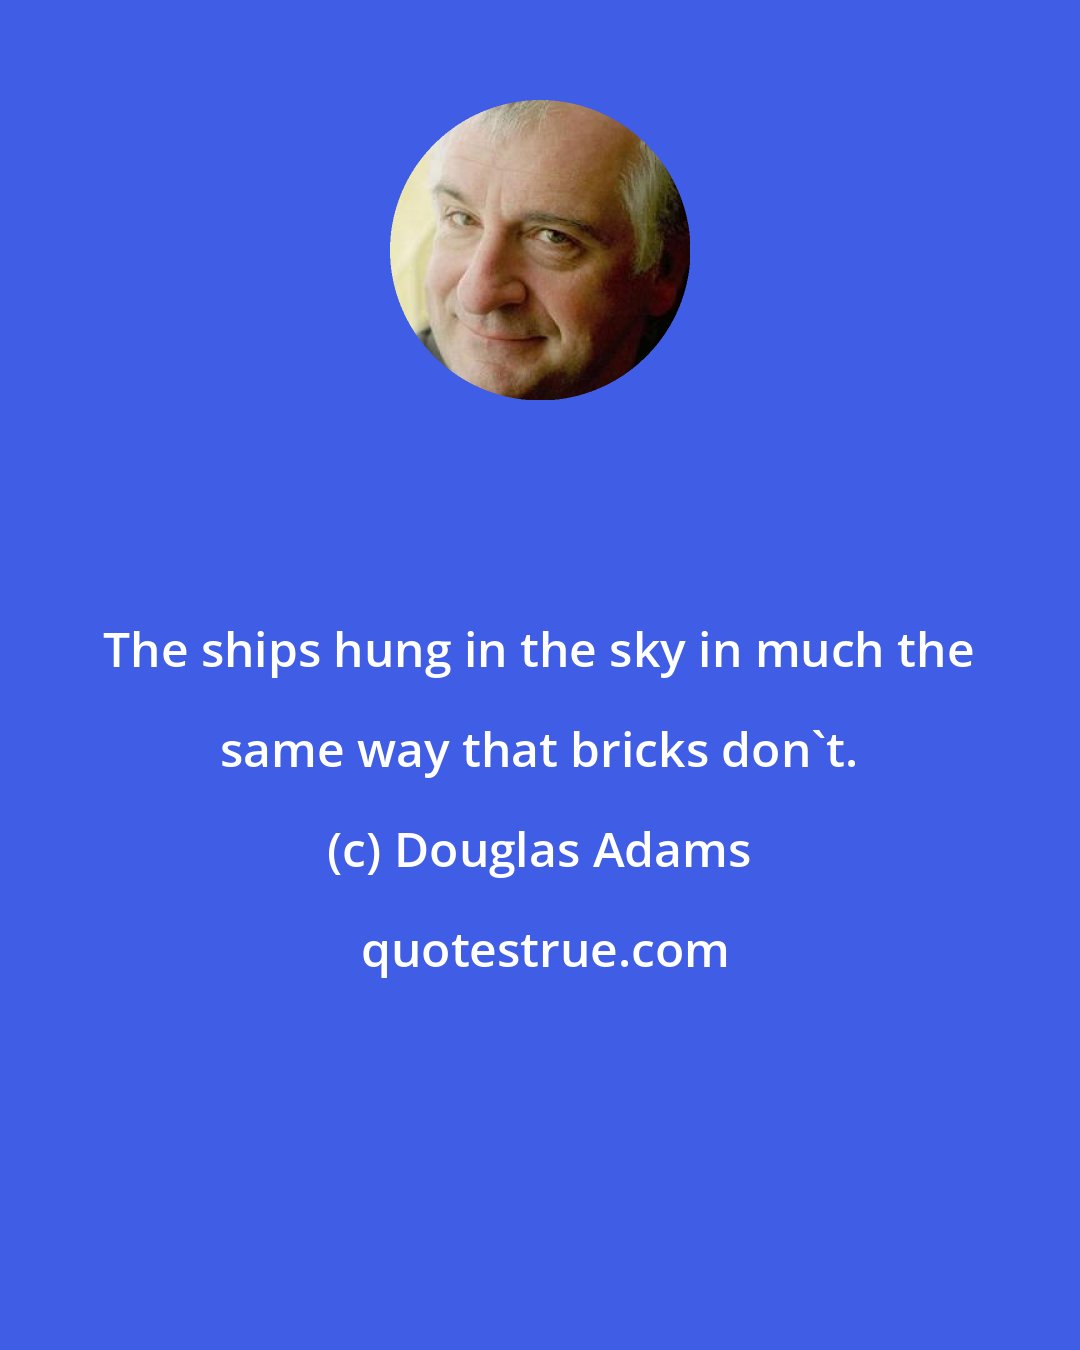 Douglas Adams: The ships hung in the sky in much the same way that bricks don't.